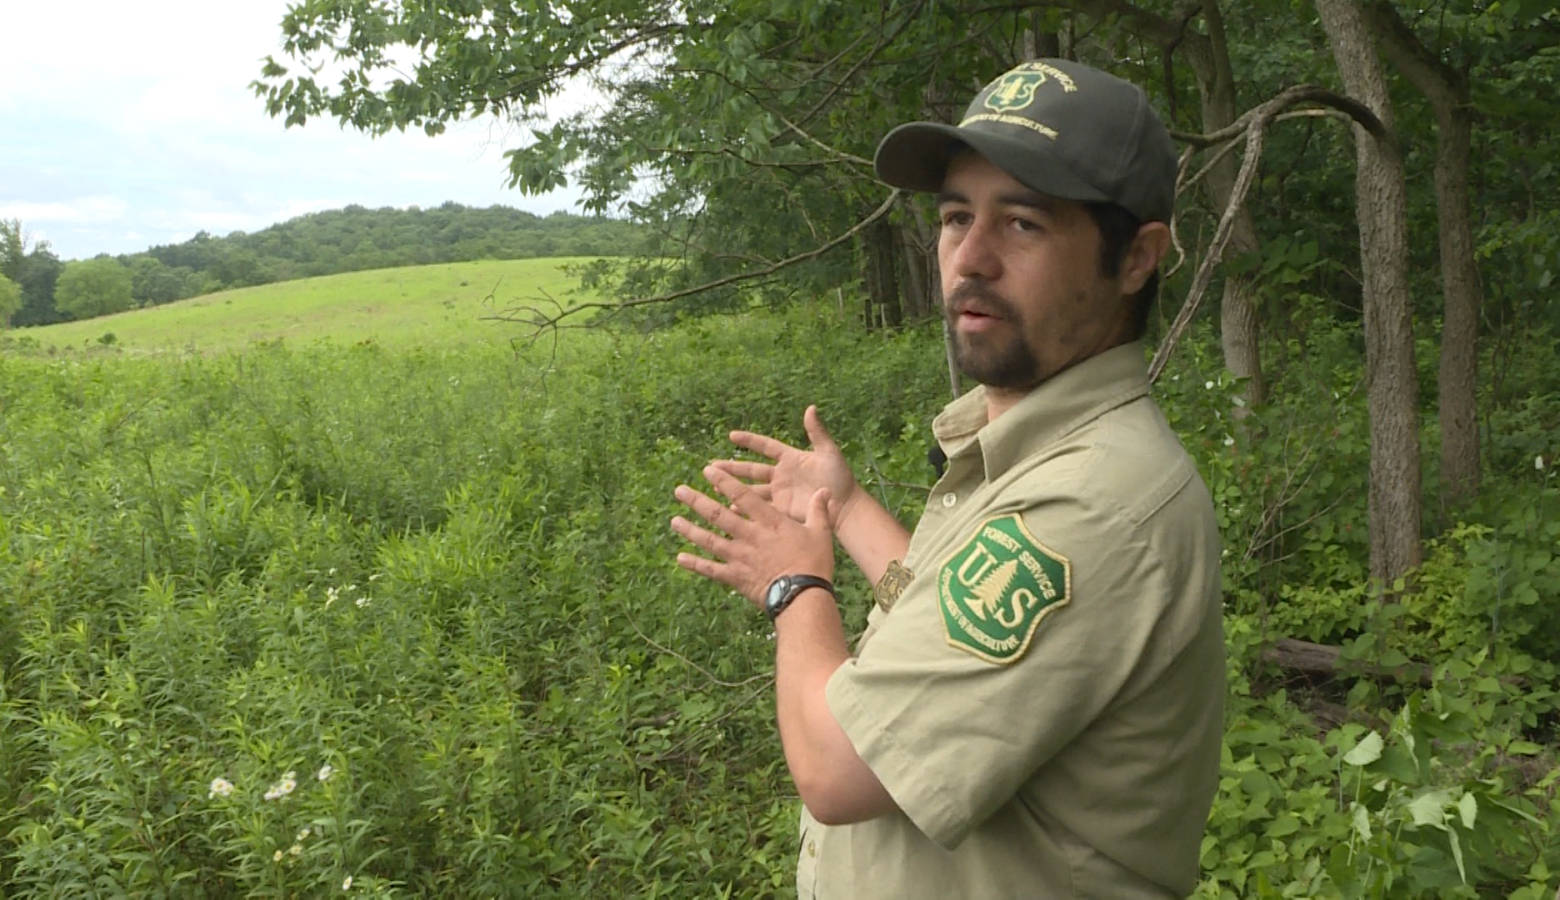 Hoosier National Forest Wildlife Technician Brian King gestures toward a forest opening the Forest Service has been managing to encourage diverse wildlife. (Rebecca Thiele/IPB News)